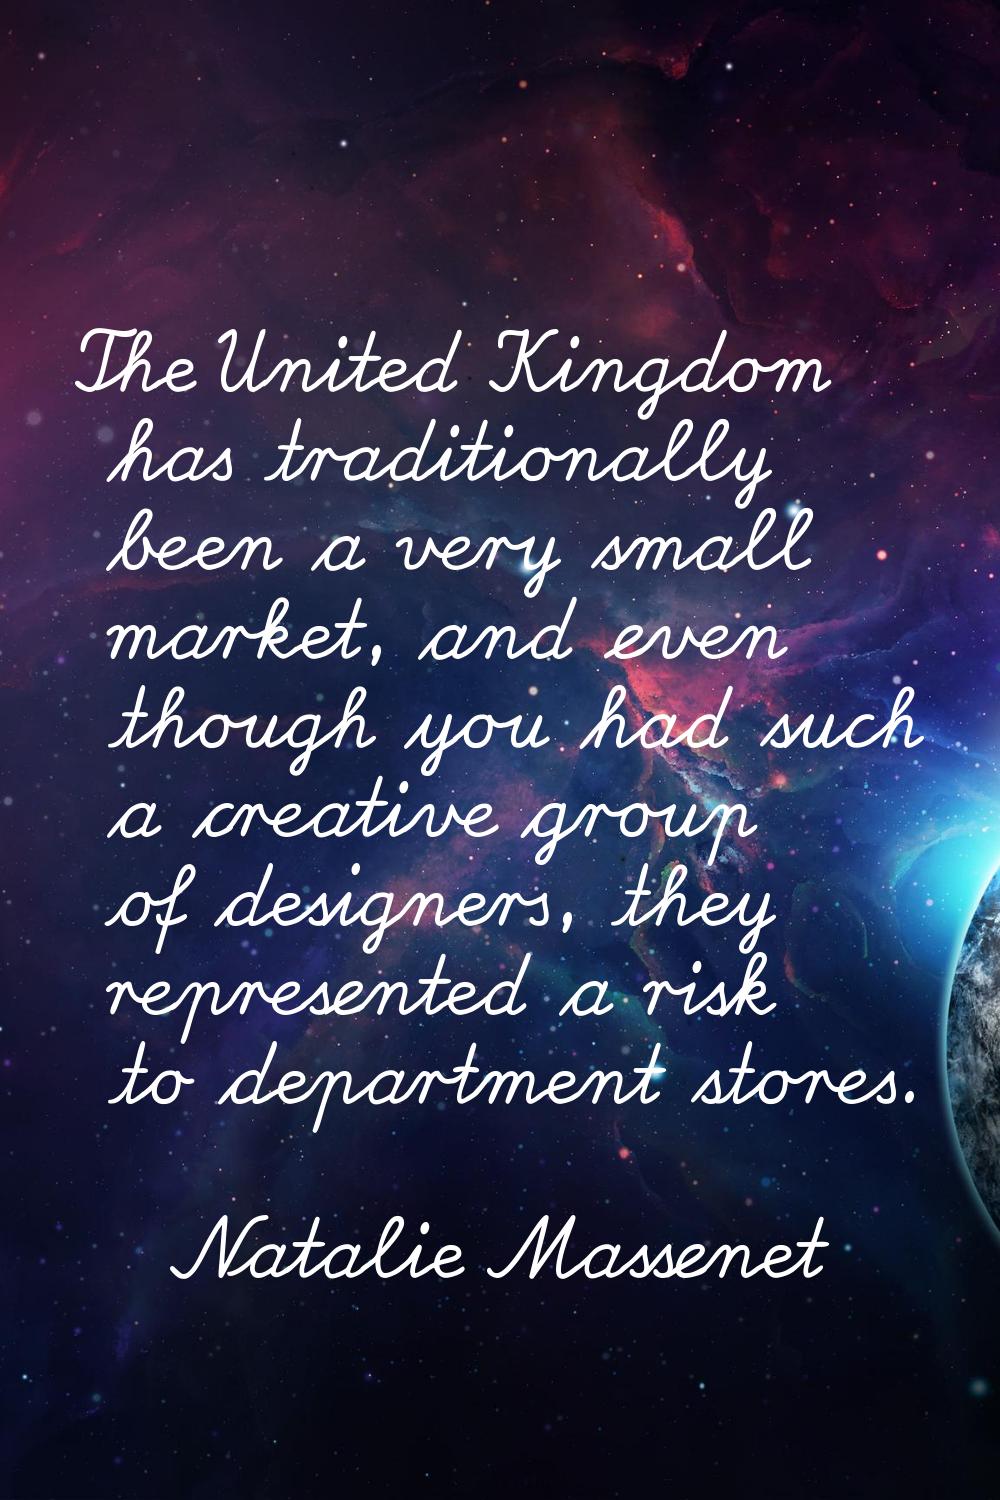 The United Kingdom has traditionally been a very small market, and even though you had such a creat